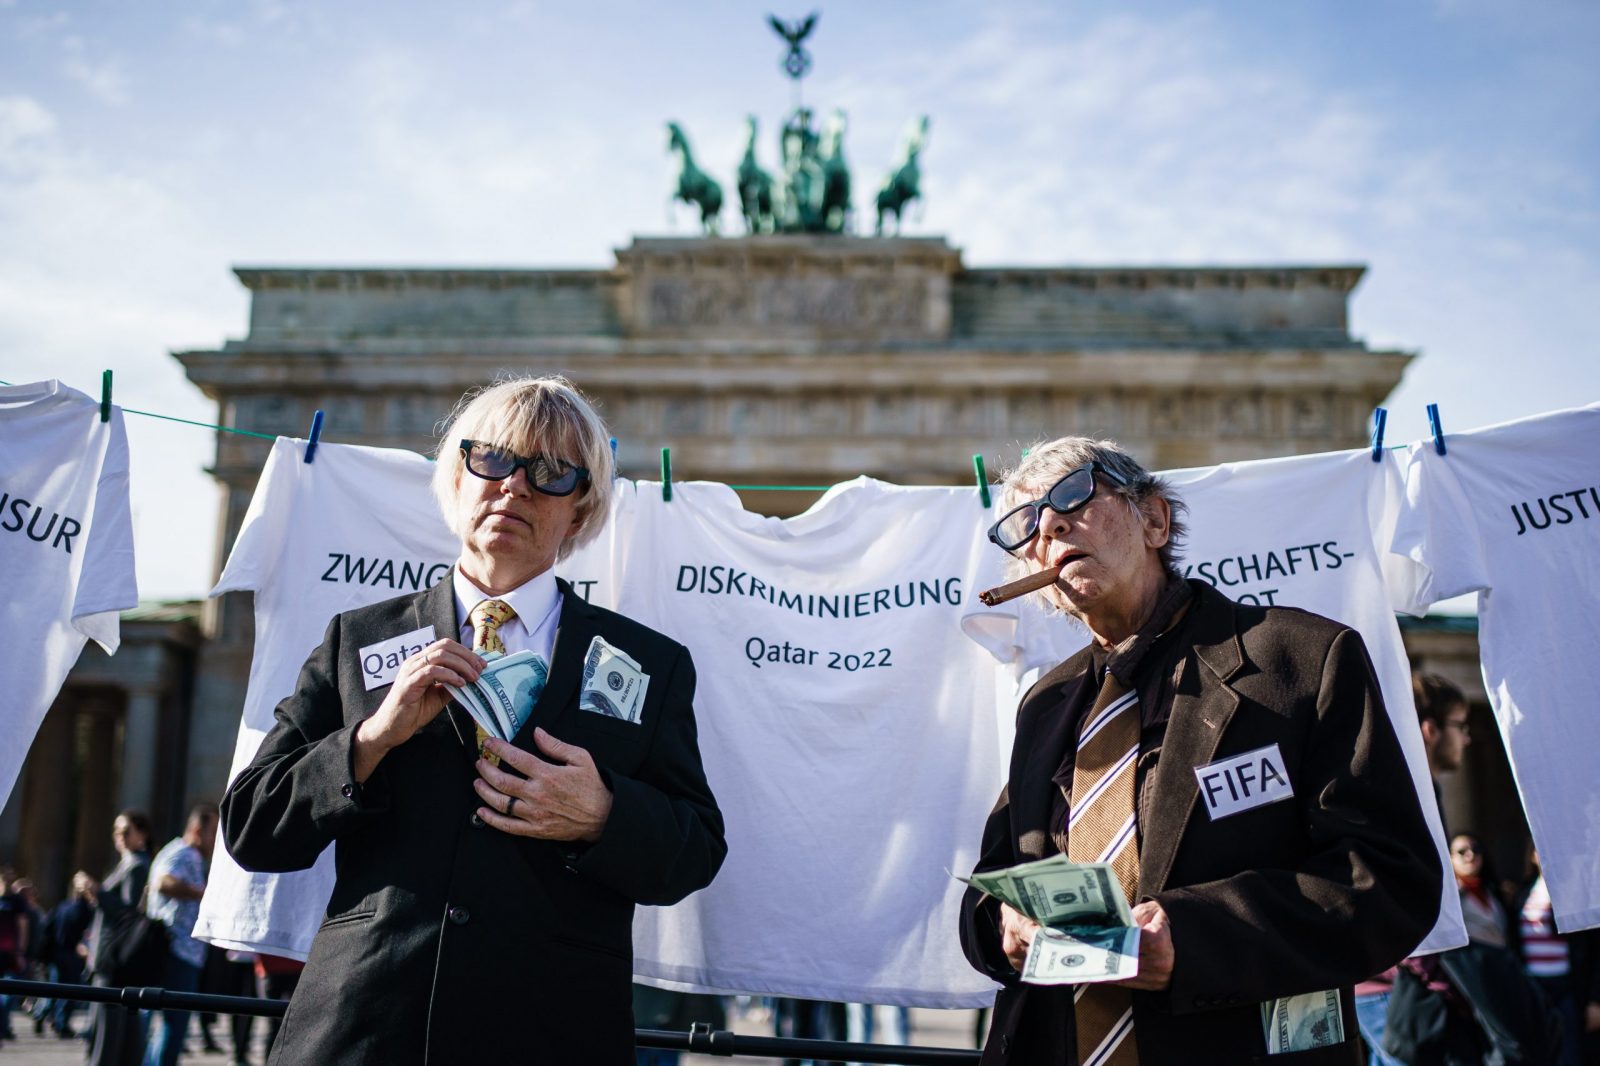 epa10260736 Activists of Amnesty International embodying representatives of FIFA (Federation Internationale de Football Association) and the state of Qatar pose in front of symbolically cleanly washed white t-shirts on a rope, in front of the Brandenburg Gate in Berlin, Germany, 23 October 2022. Amnesty International demonstrated with a role play against sportswashing and criticised the human rights situation in Qatar prior to the FIFA World Cup Qatar 2022.  EPA/CLEMENS BILAN